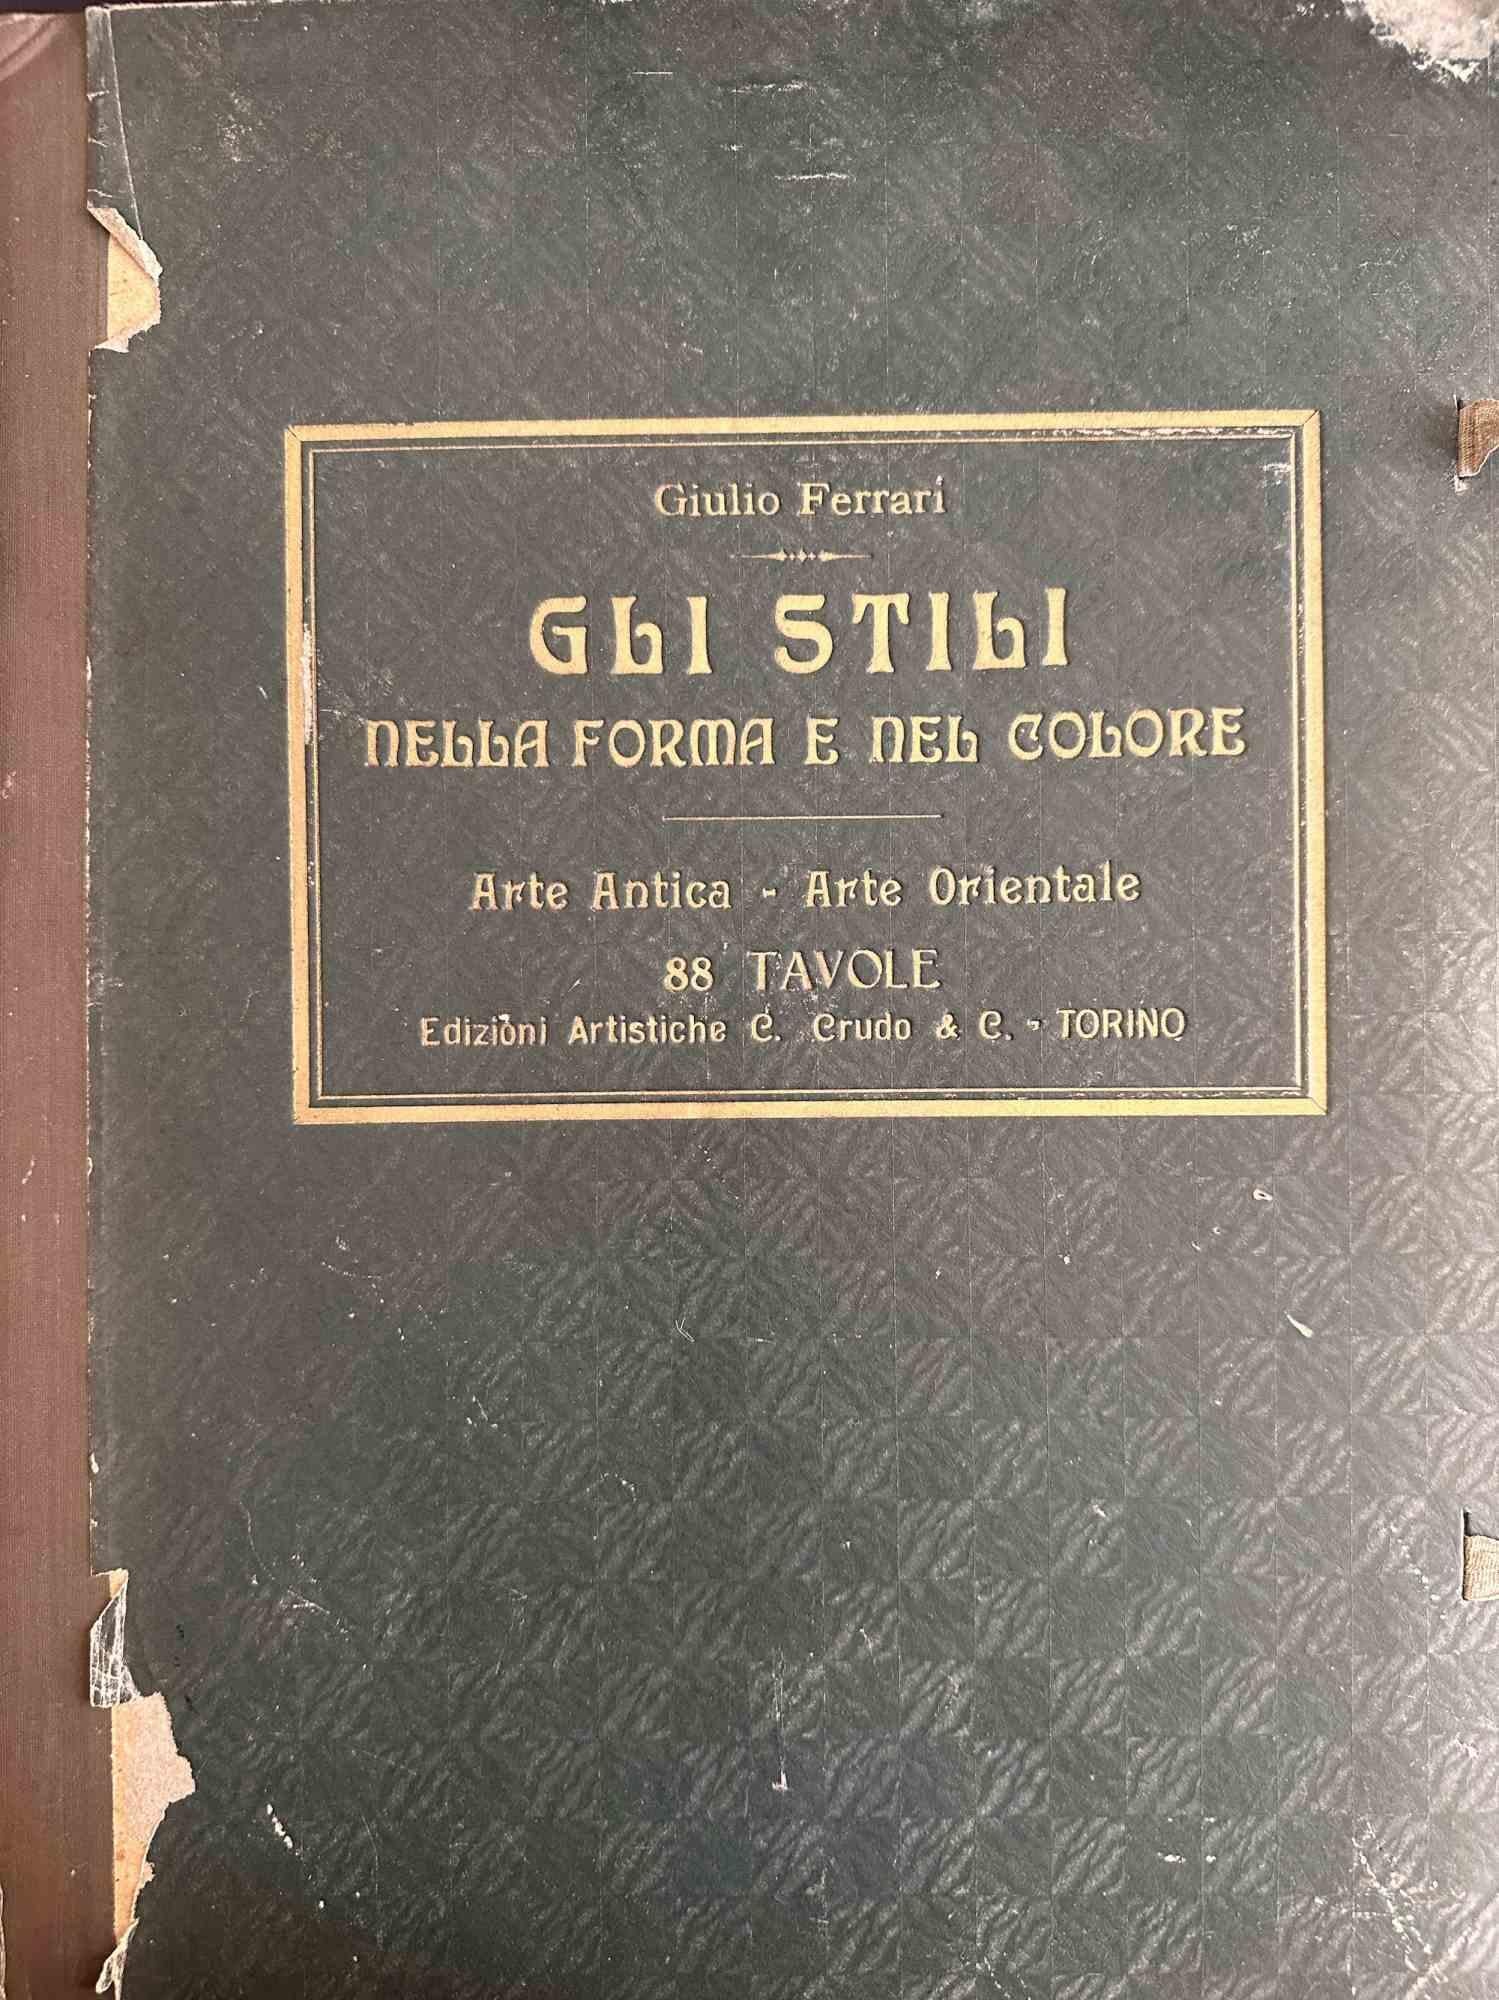 Book of Style in Form and Color is a rare and precious book realized by Giulio Ferrari in 1925.

Artistic edition C. Cruda, Turin.

88 Plate, Antique art, and Oriental art.

Fair conditions, with declaration and aged margins and folding of pages.